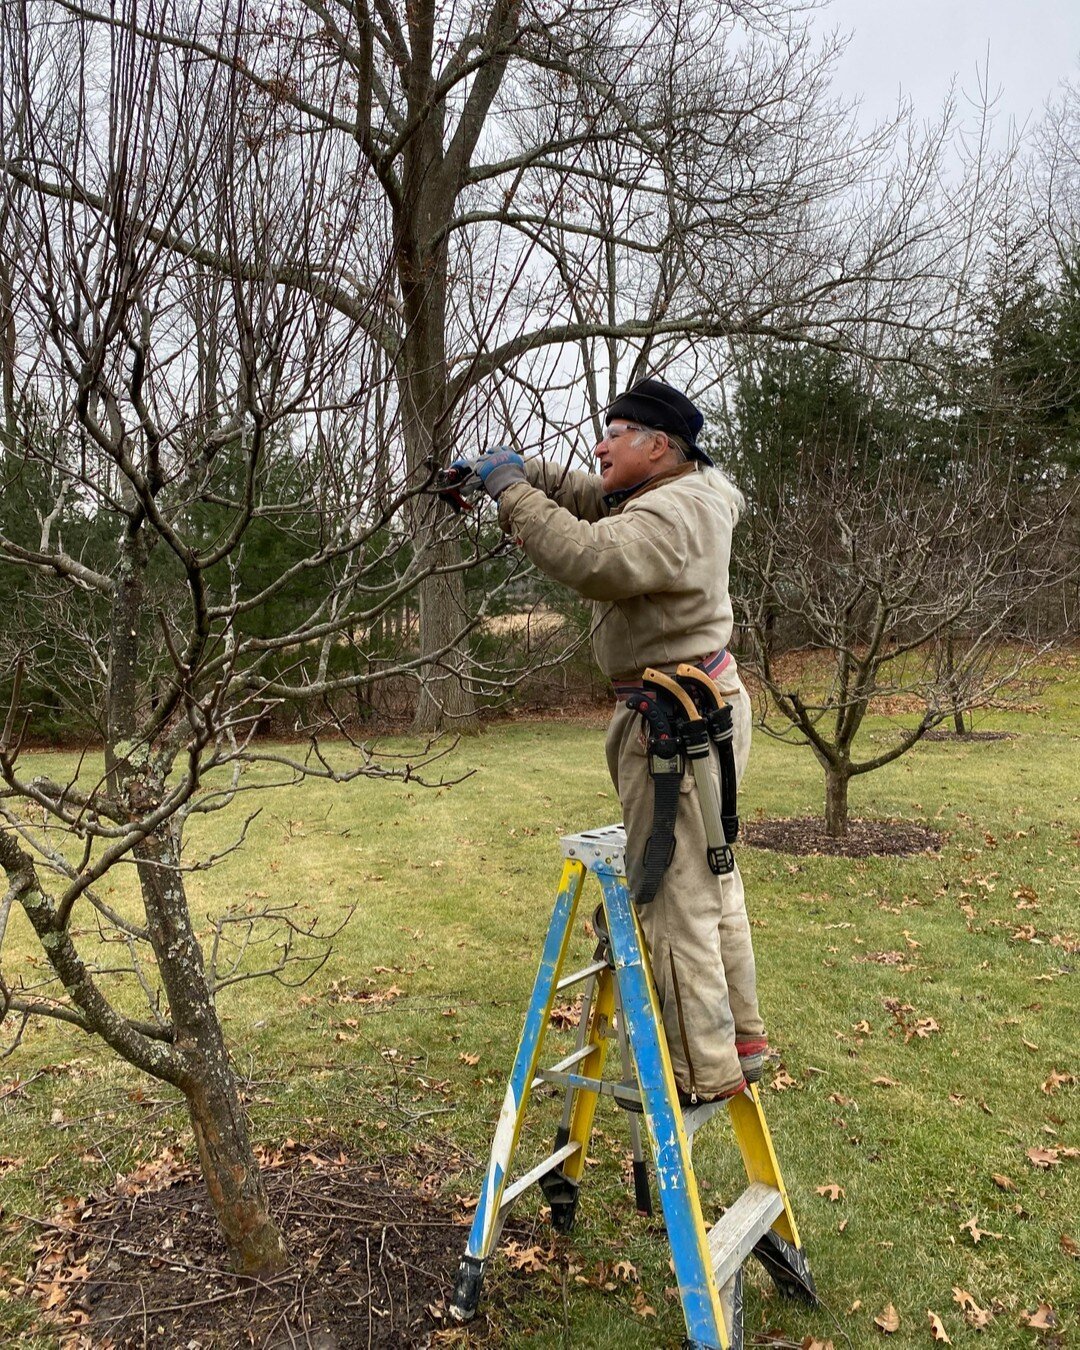 Today is National Farm Workers Day and we're paying tribute to all those who help us on our farm. ​​​​​​​​​
A few weeks back, local arborist Frank Mastropaolo helped us prune our trees into shape and prepare them for another year of growth. From prun